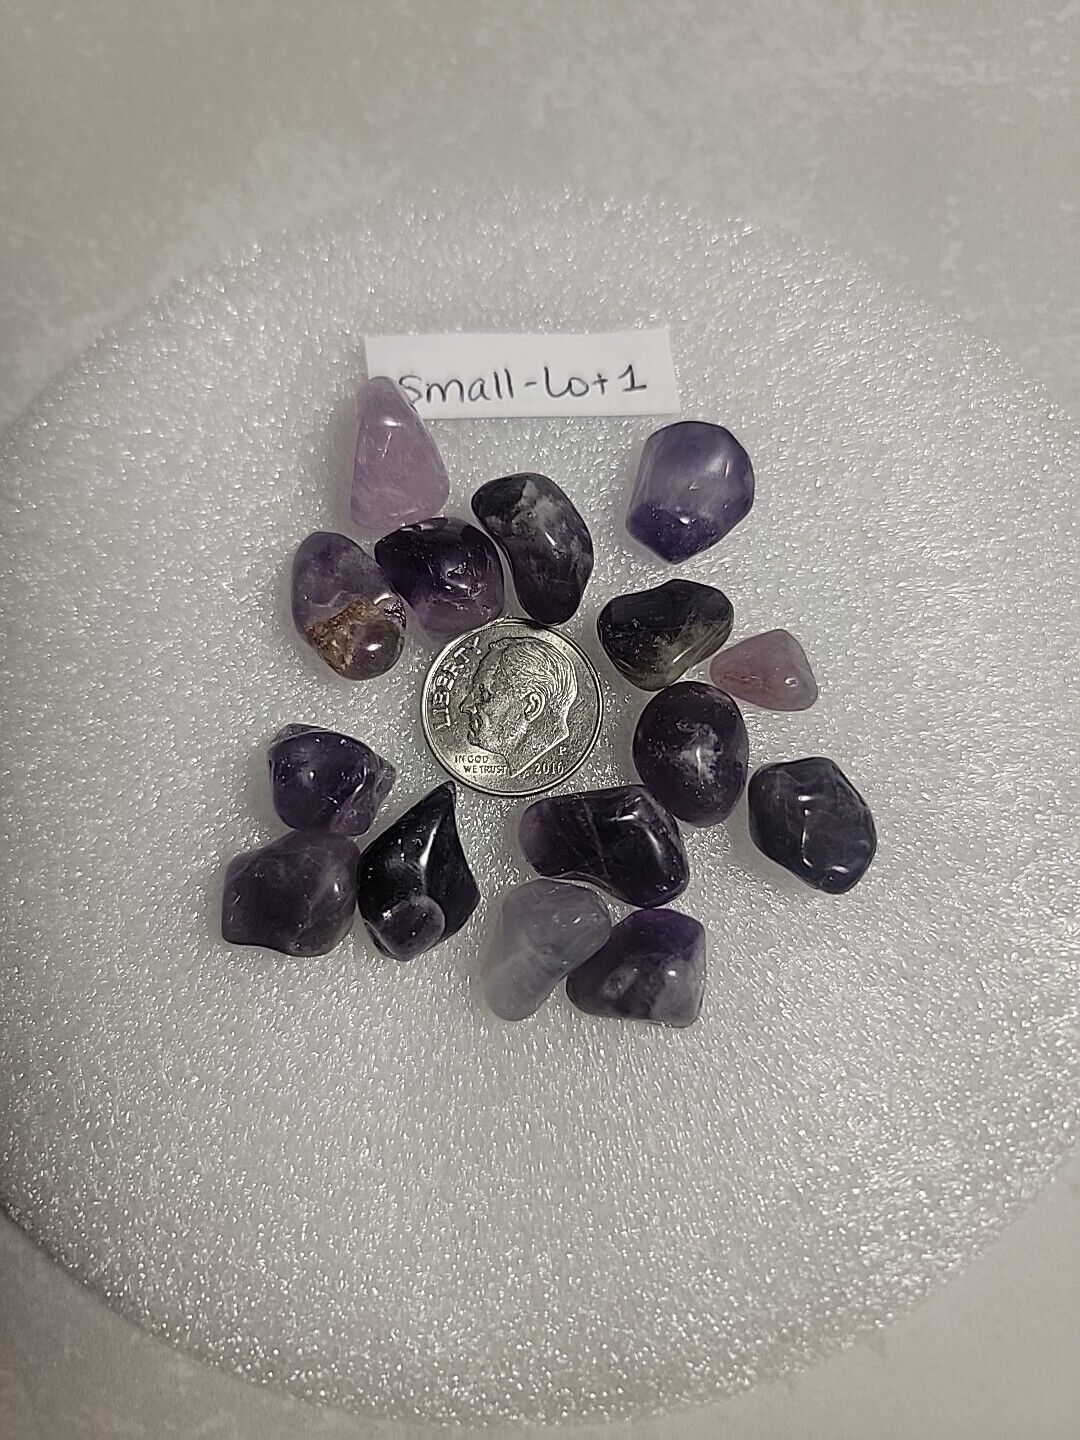 Genuine Amethyst Polished Stone, Bulk Lot 1 - 15 Stones - Small In Size 